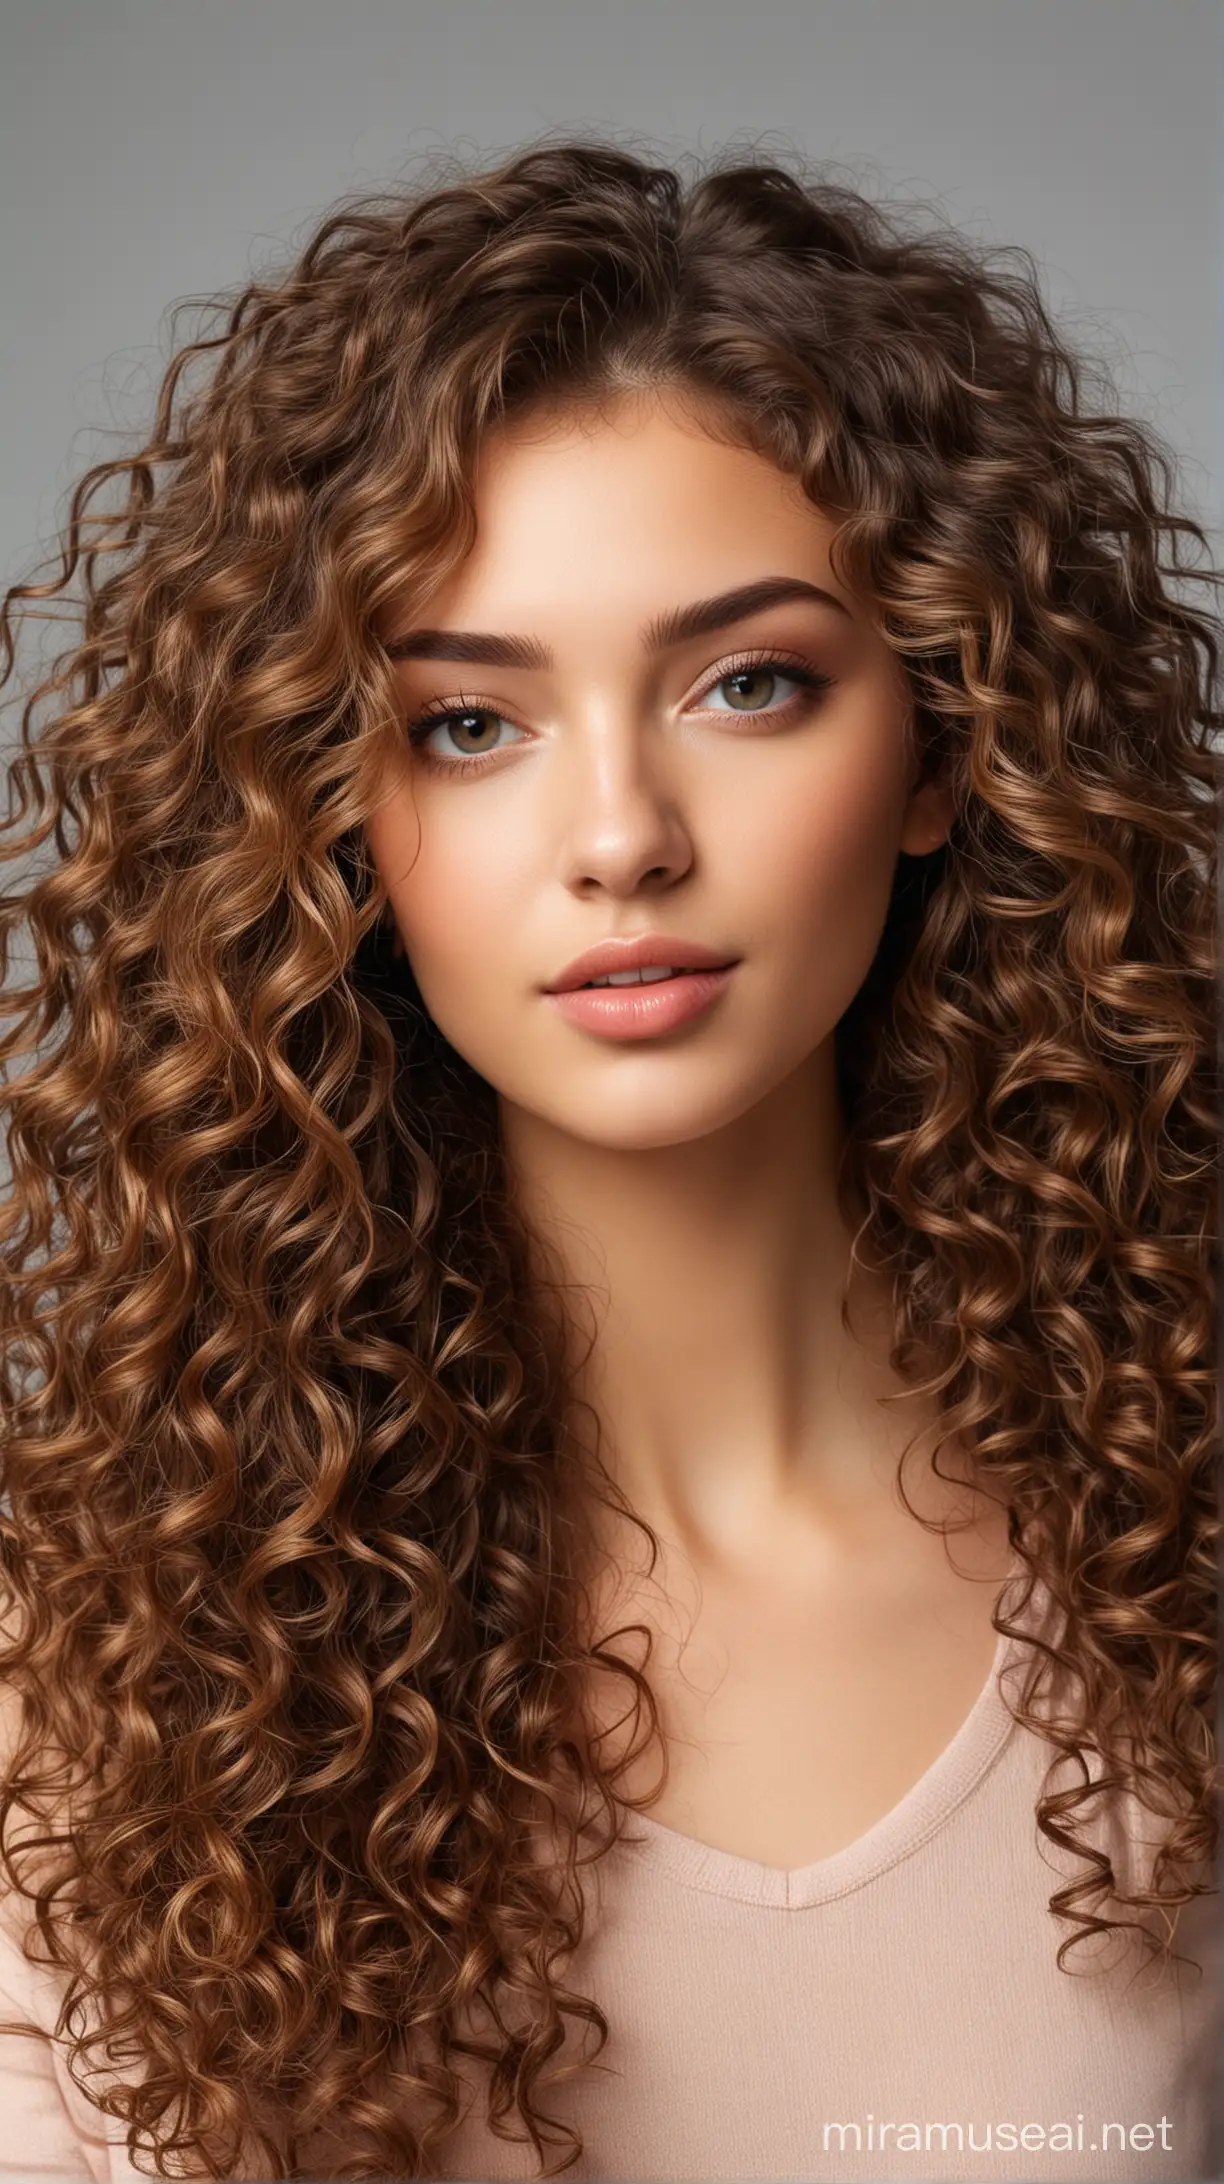 Stunning Model with Gorgeous and Vibrant Curly Hair